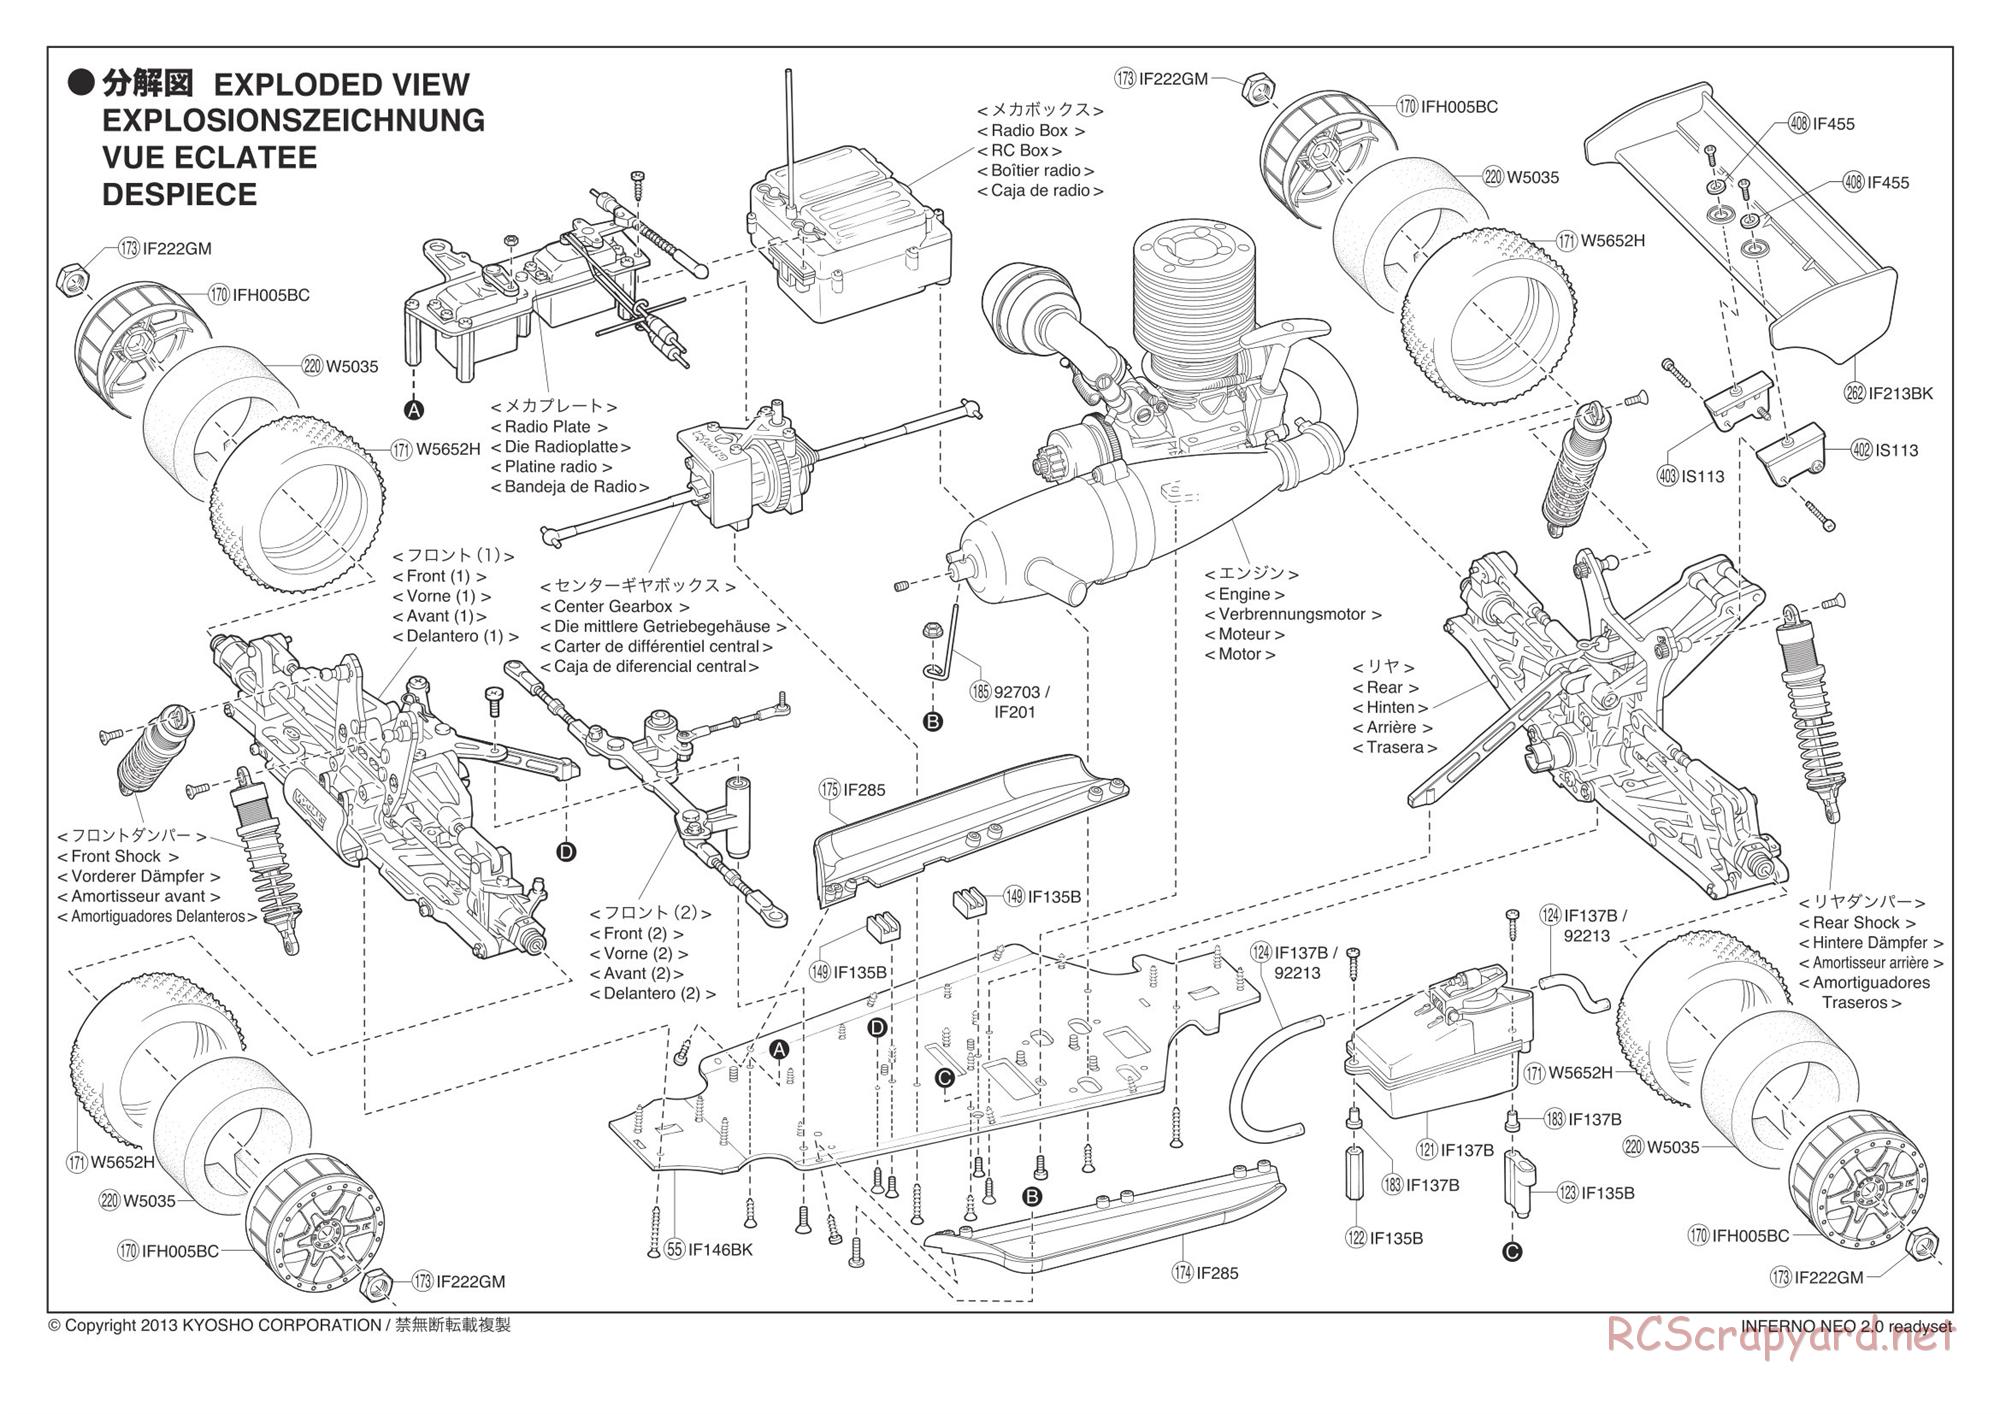 Kyosho - Inferno Neo 2.0 - Exploded Views - Page 1